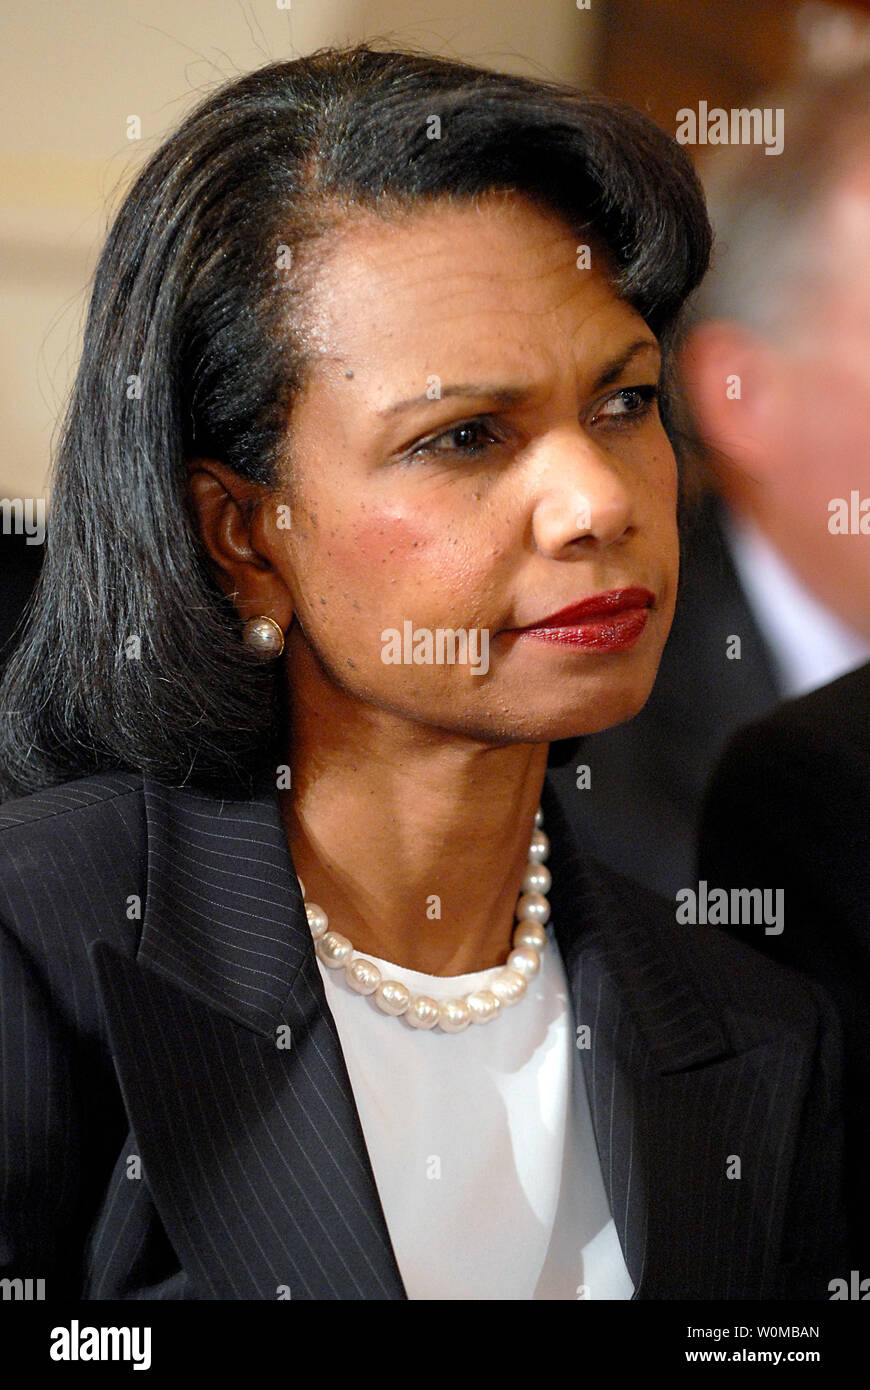 United States Secretary of State Condoleezza Rice listens as United States President George W. Bush makes emarks on Cuba Policy at the United States Department of State in Washington, D.C. on Wednesday, October 24, 2007..Credit: Ron Sachs / Pool via CNP Stock Photo